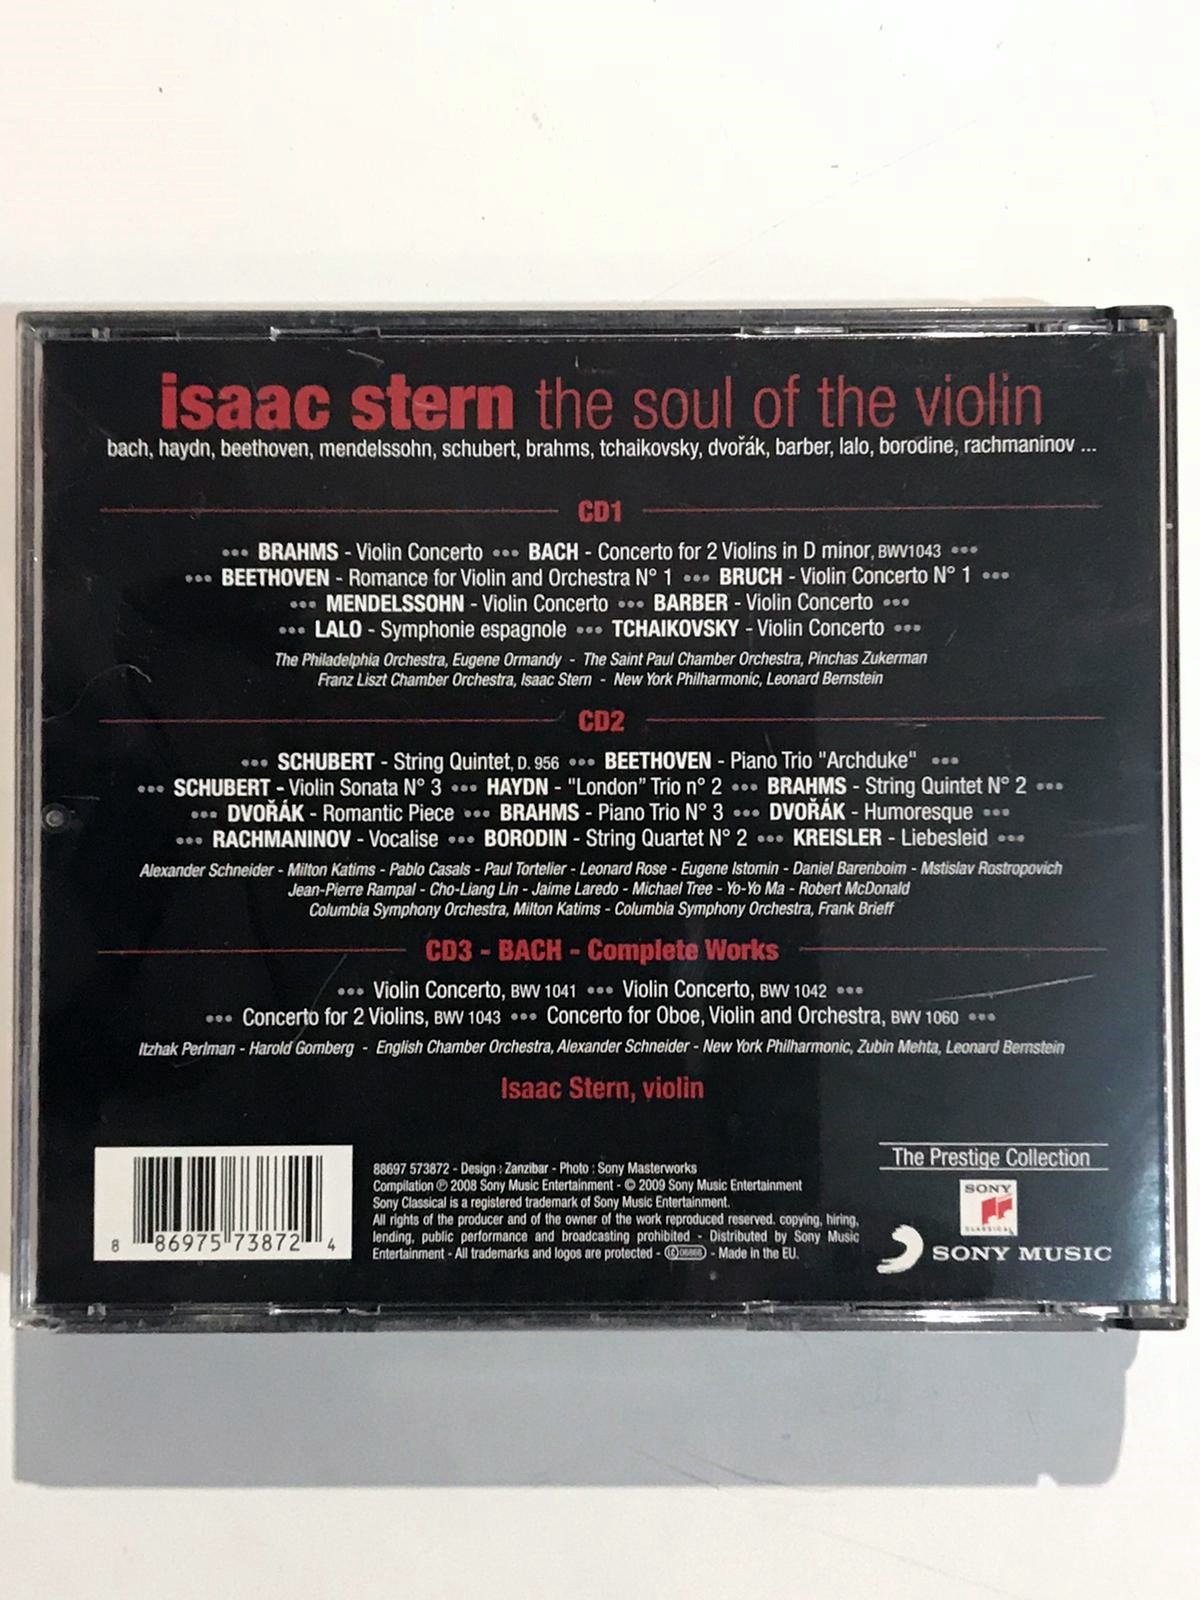 The soul of the violin / İsaac STERN - Cd